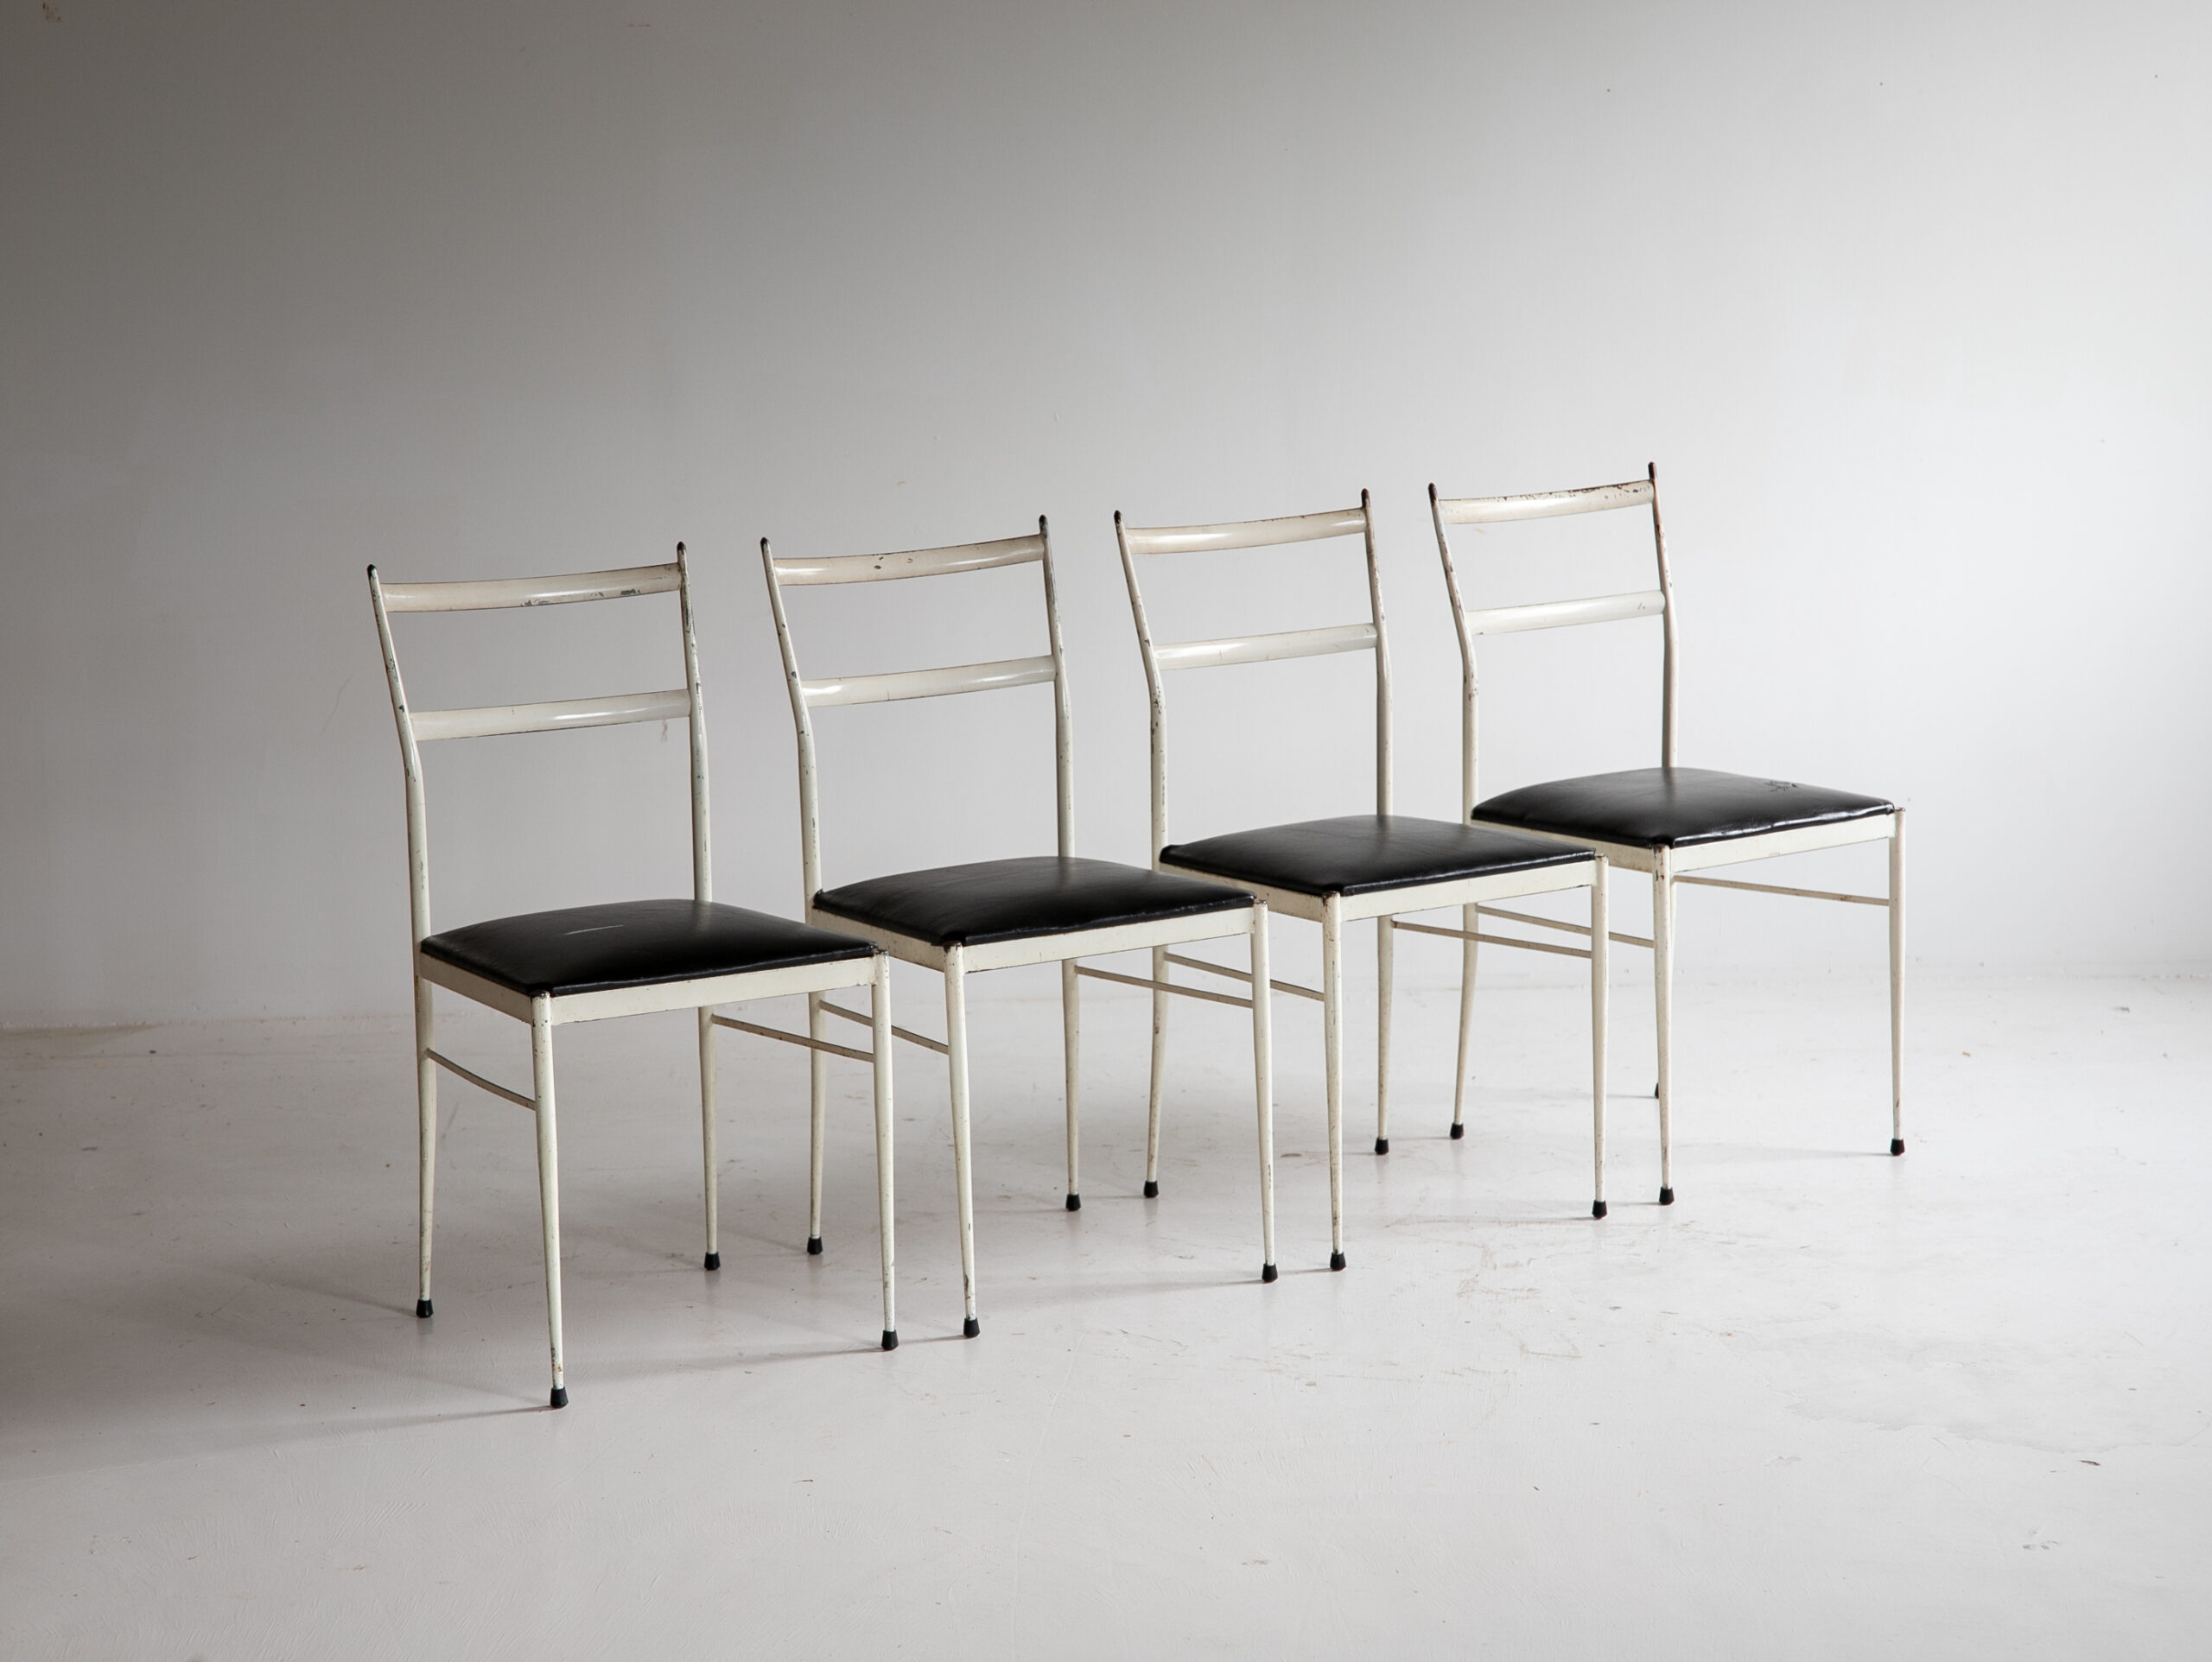 Italian modern dining chairs in the Gio Ponti style